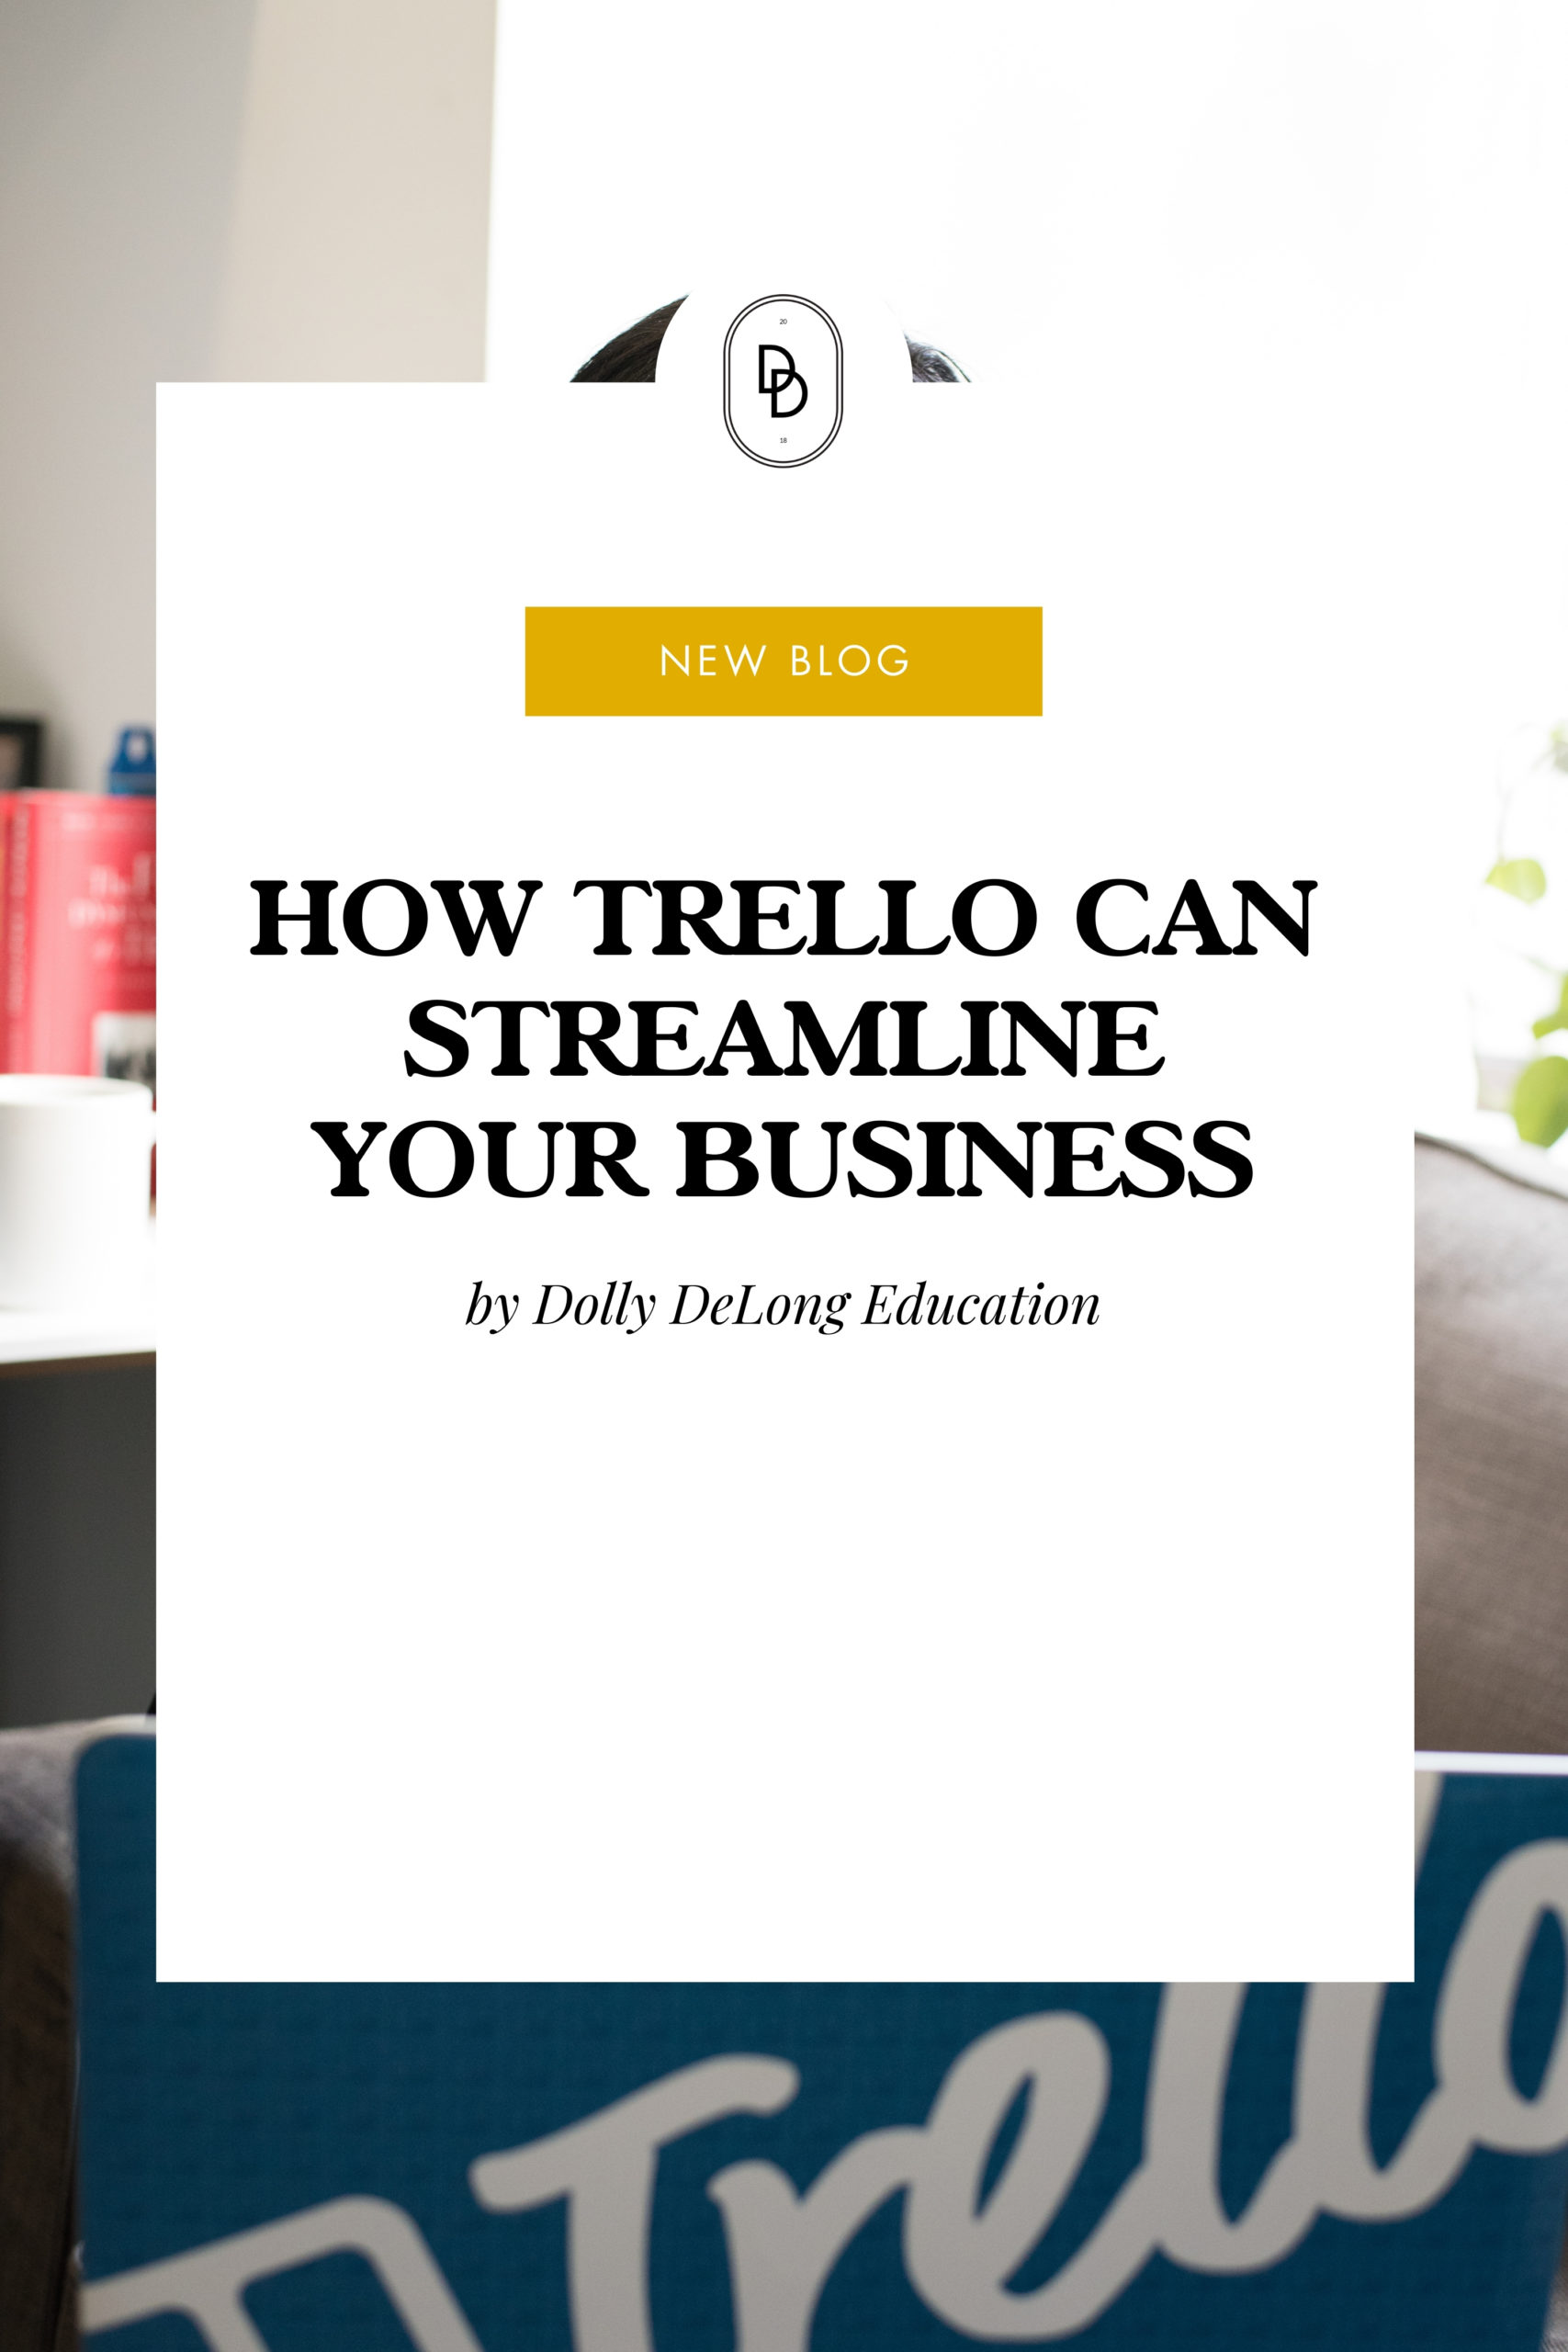 How Trello can better streamline and organize your business by Business sytems educator Dolly DeLong